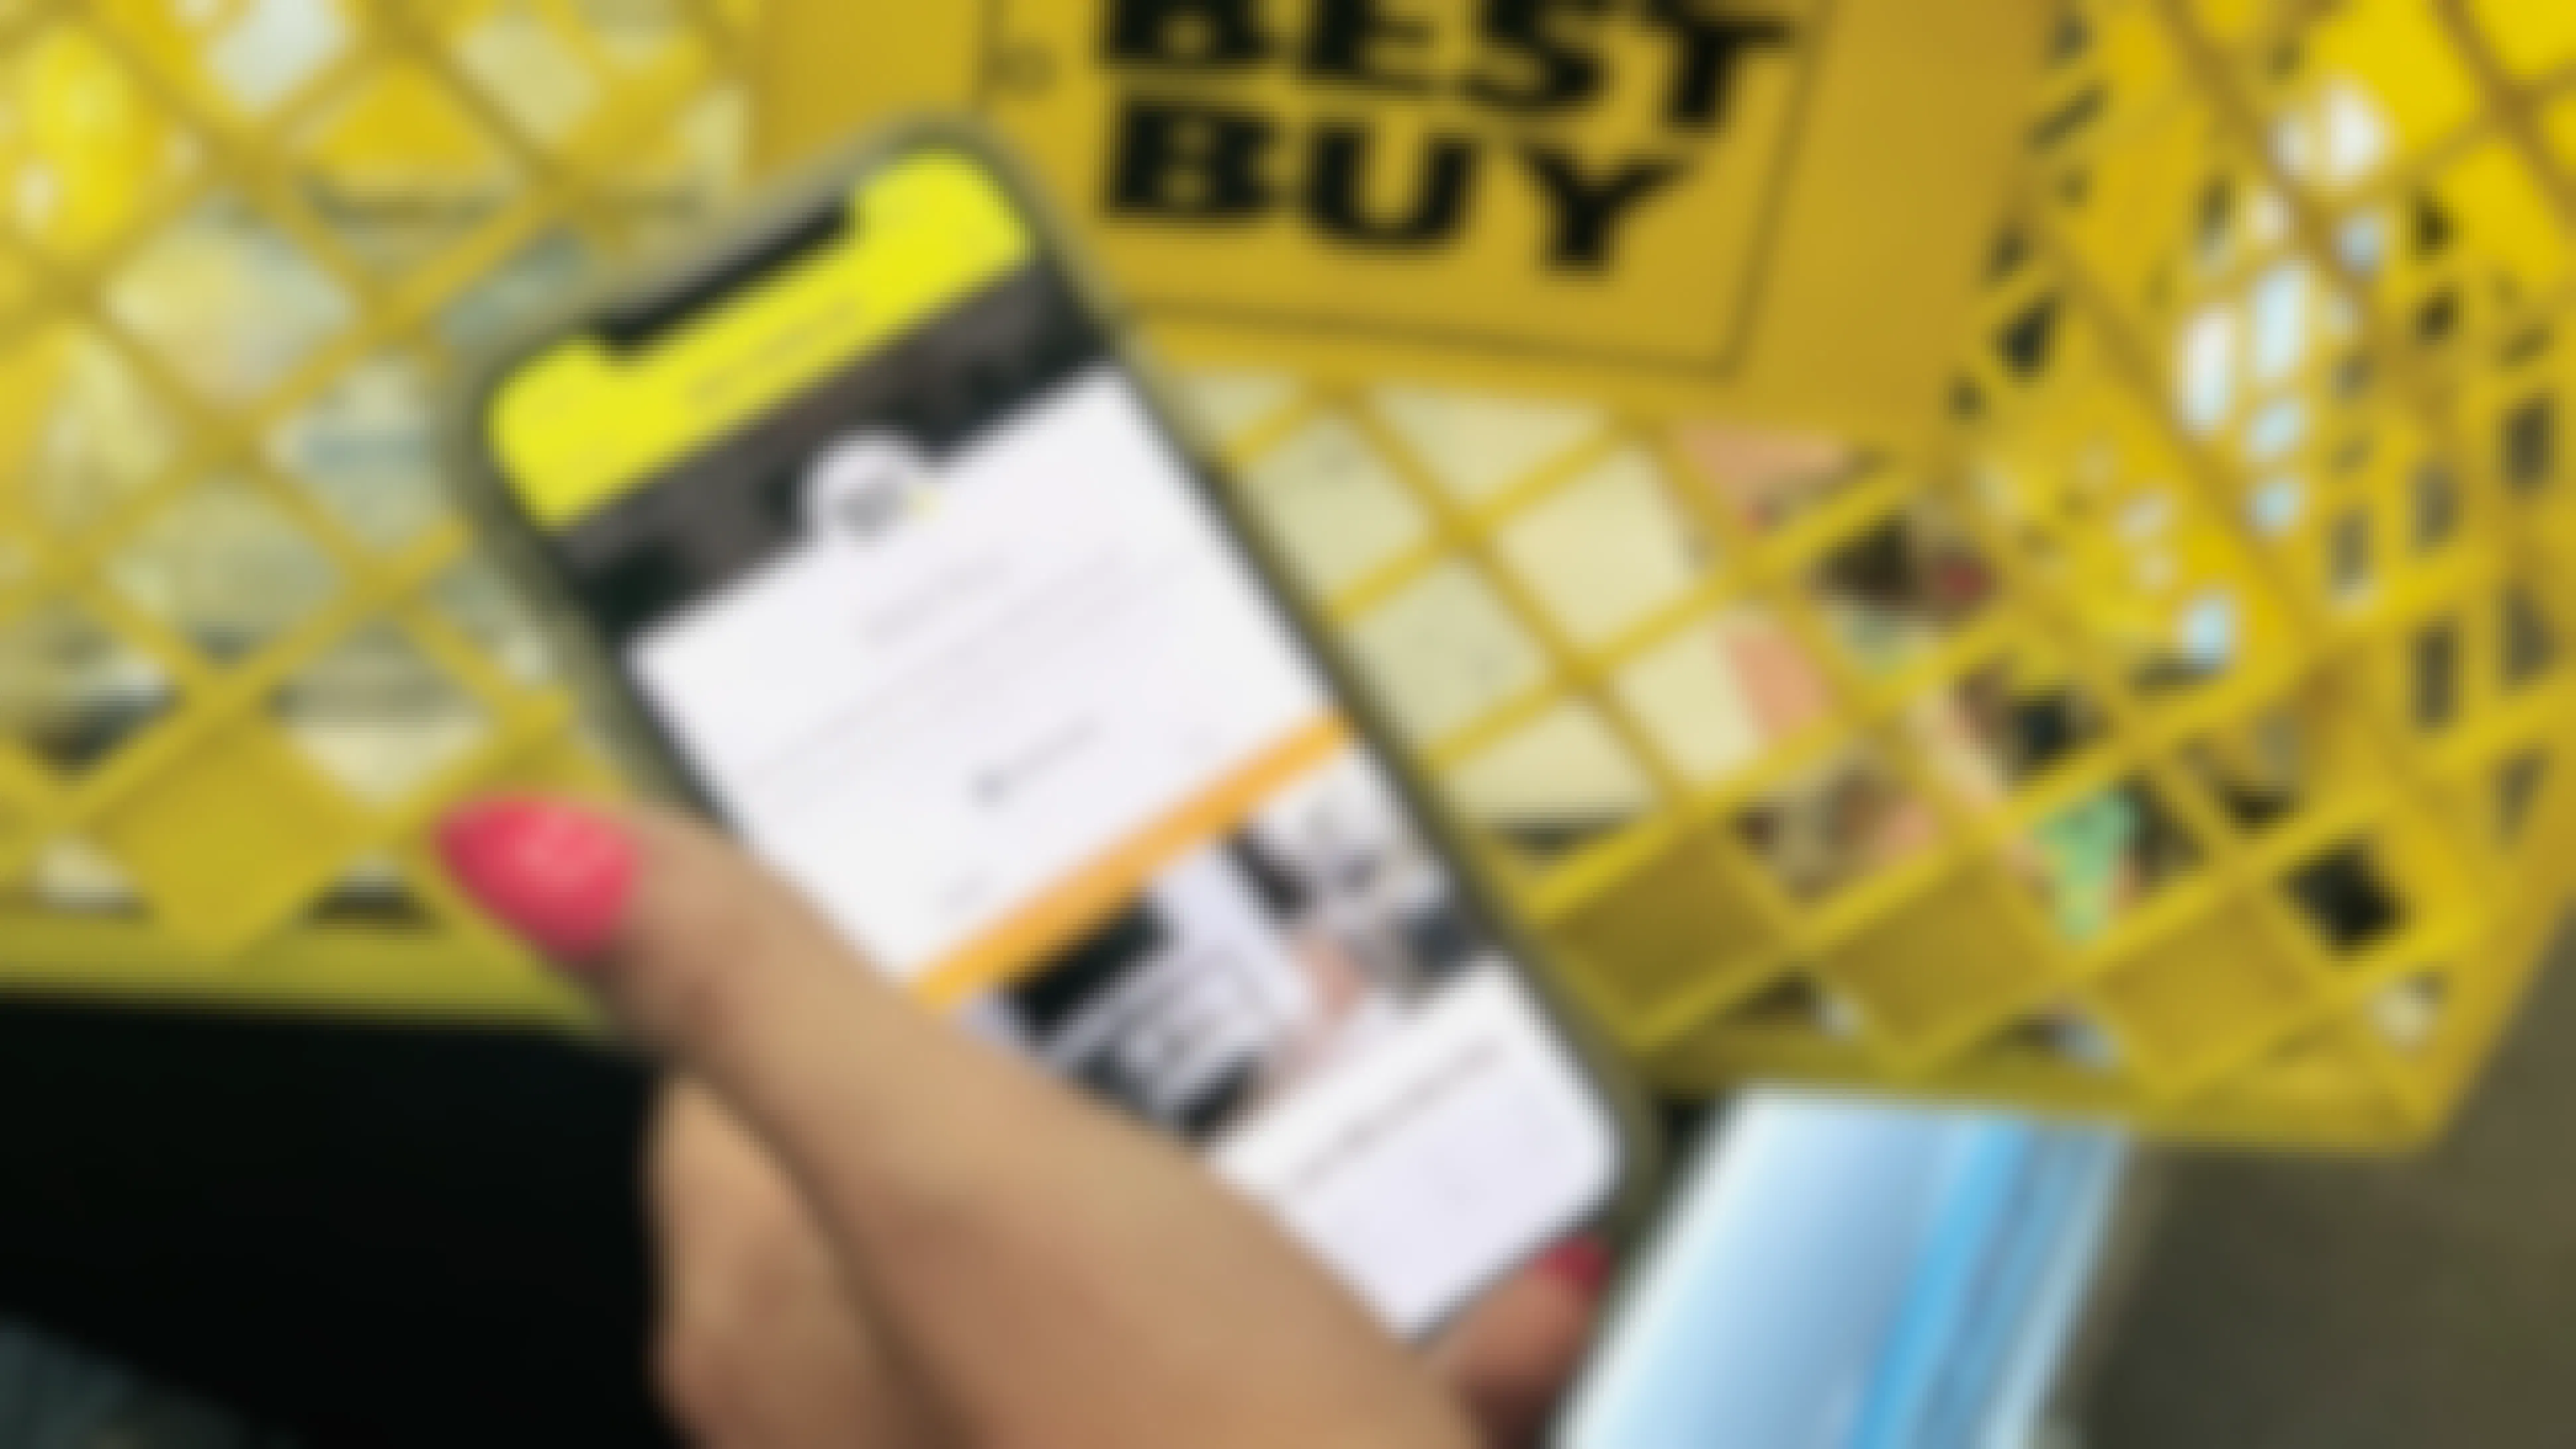 Download the Krazy Coupon Lady app for the most up-to-date deal scenarios and Best Buy coupons.